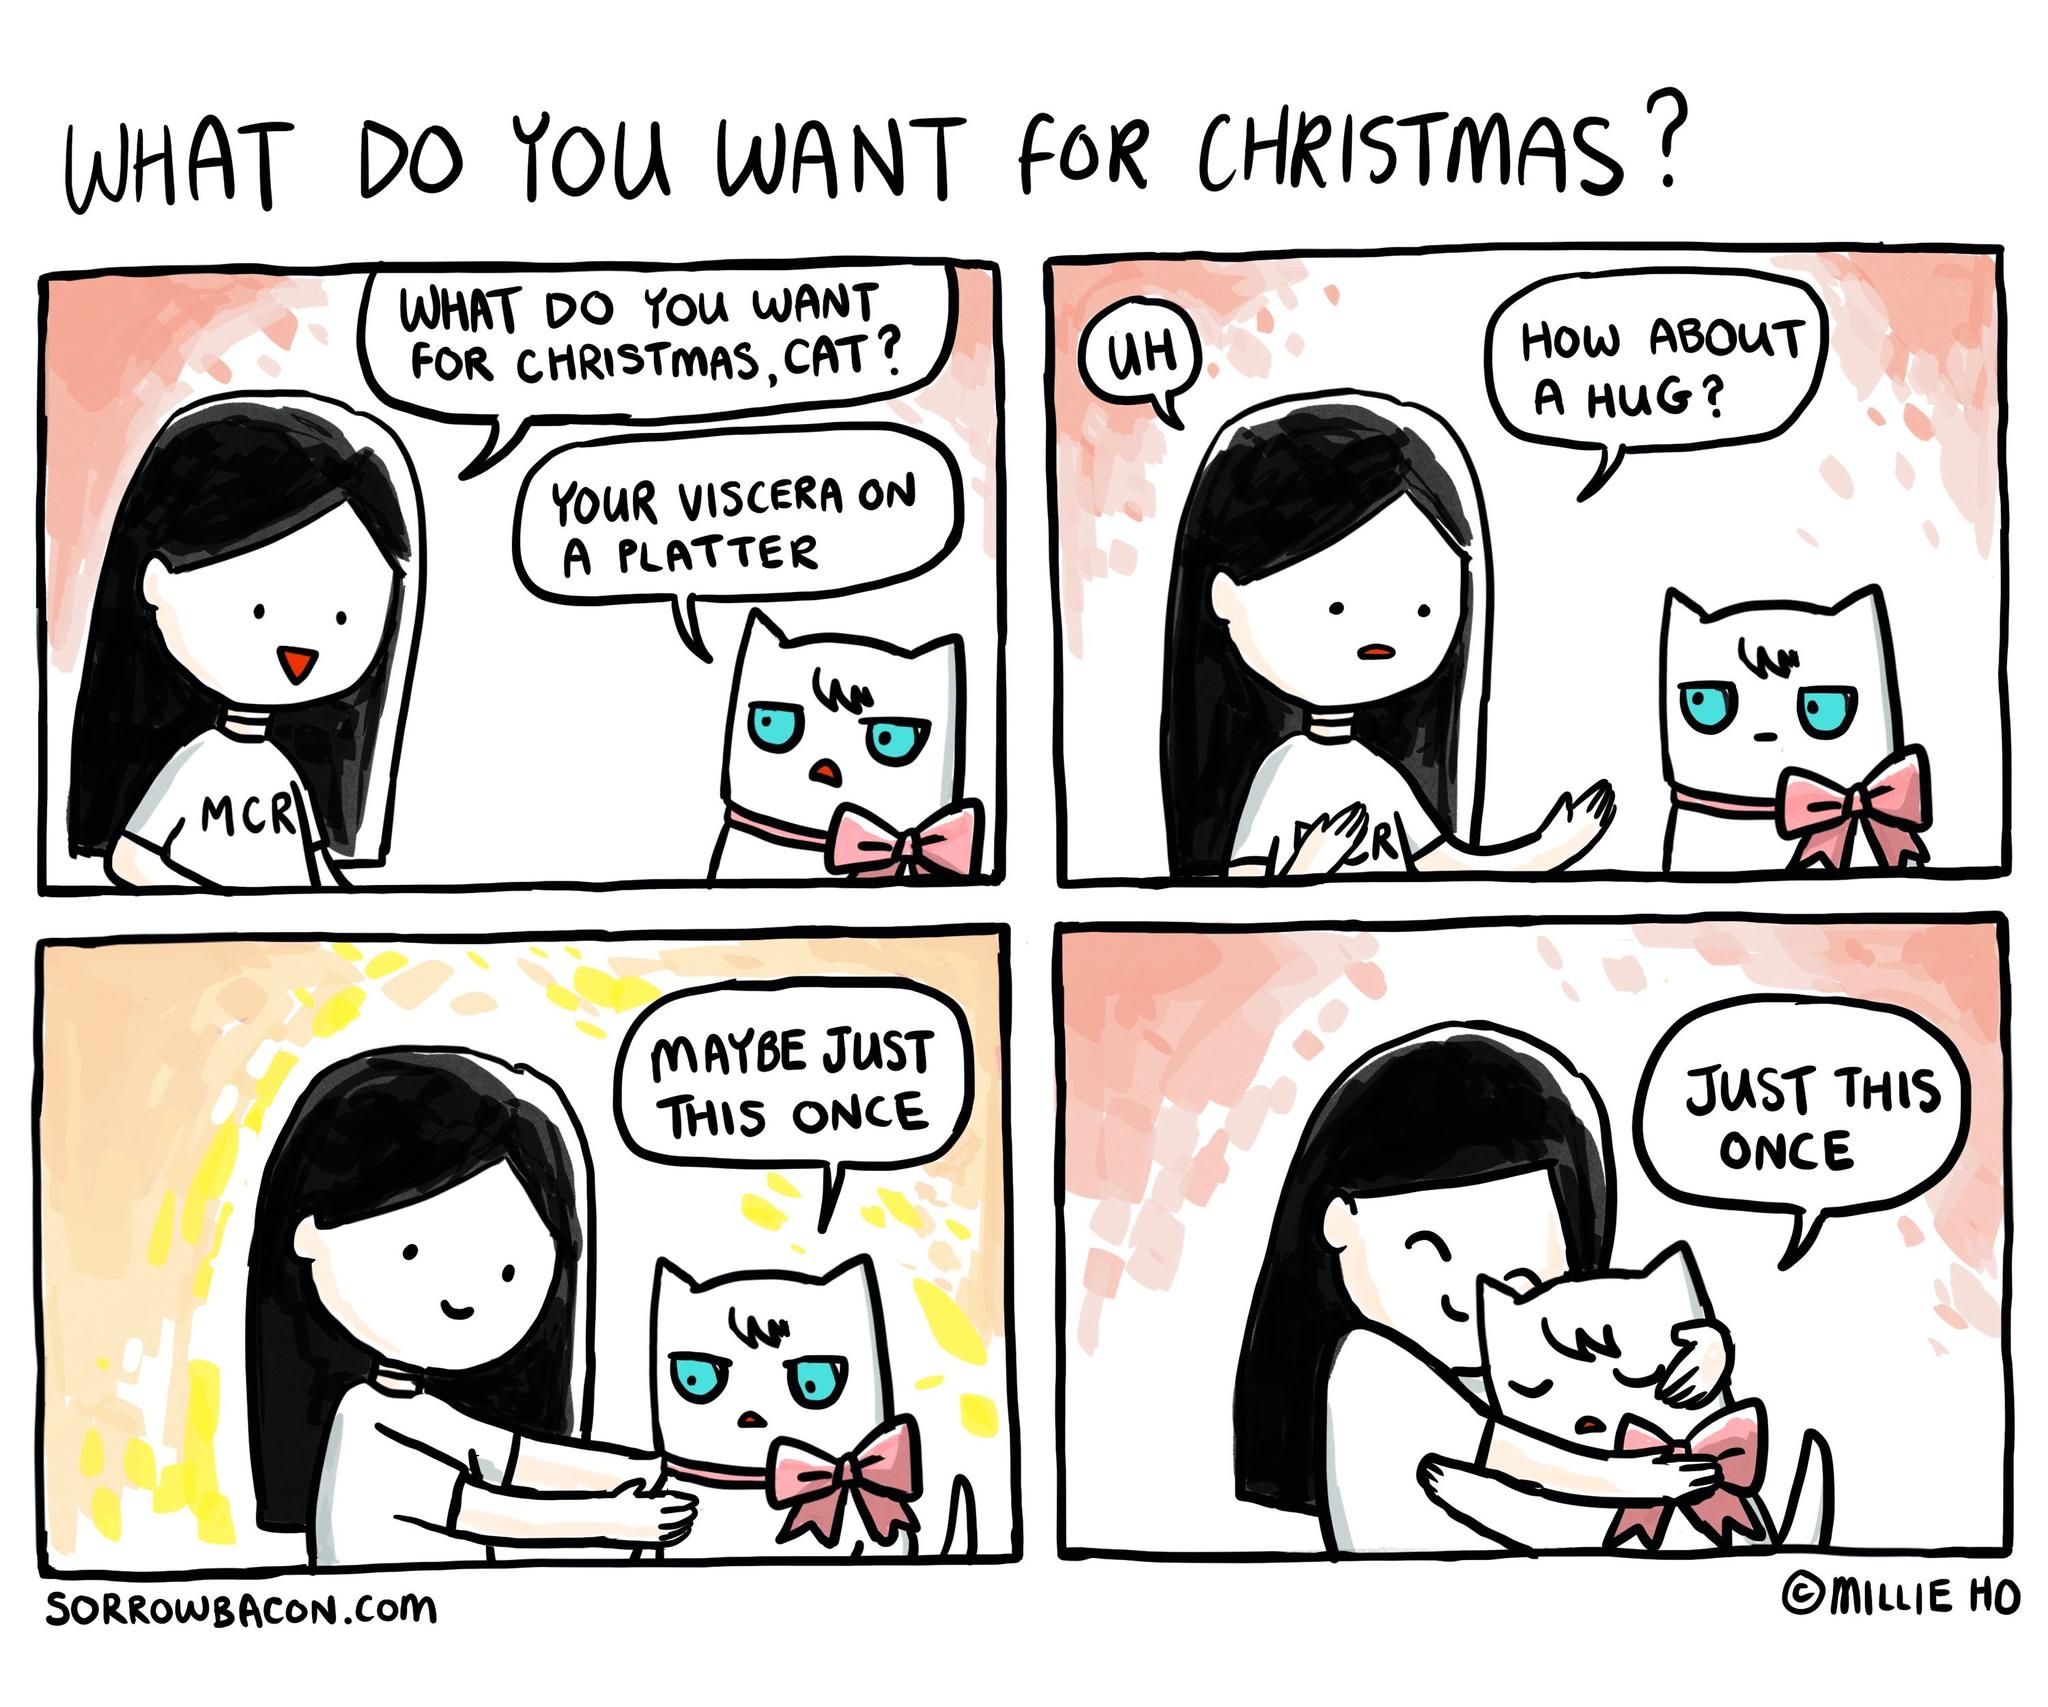 What Do You Want For Christmas sorrowbacon comic